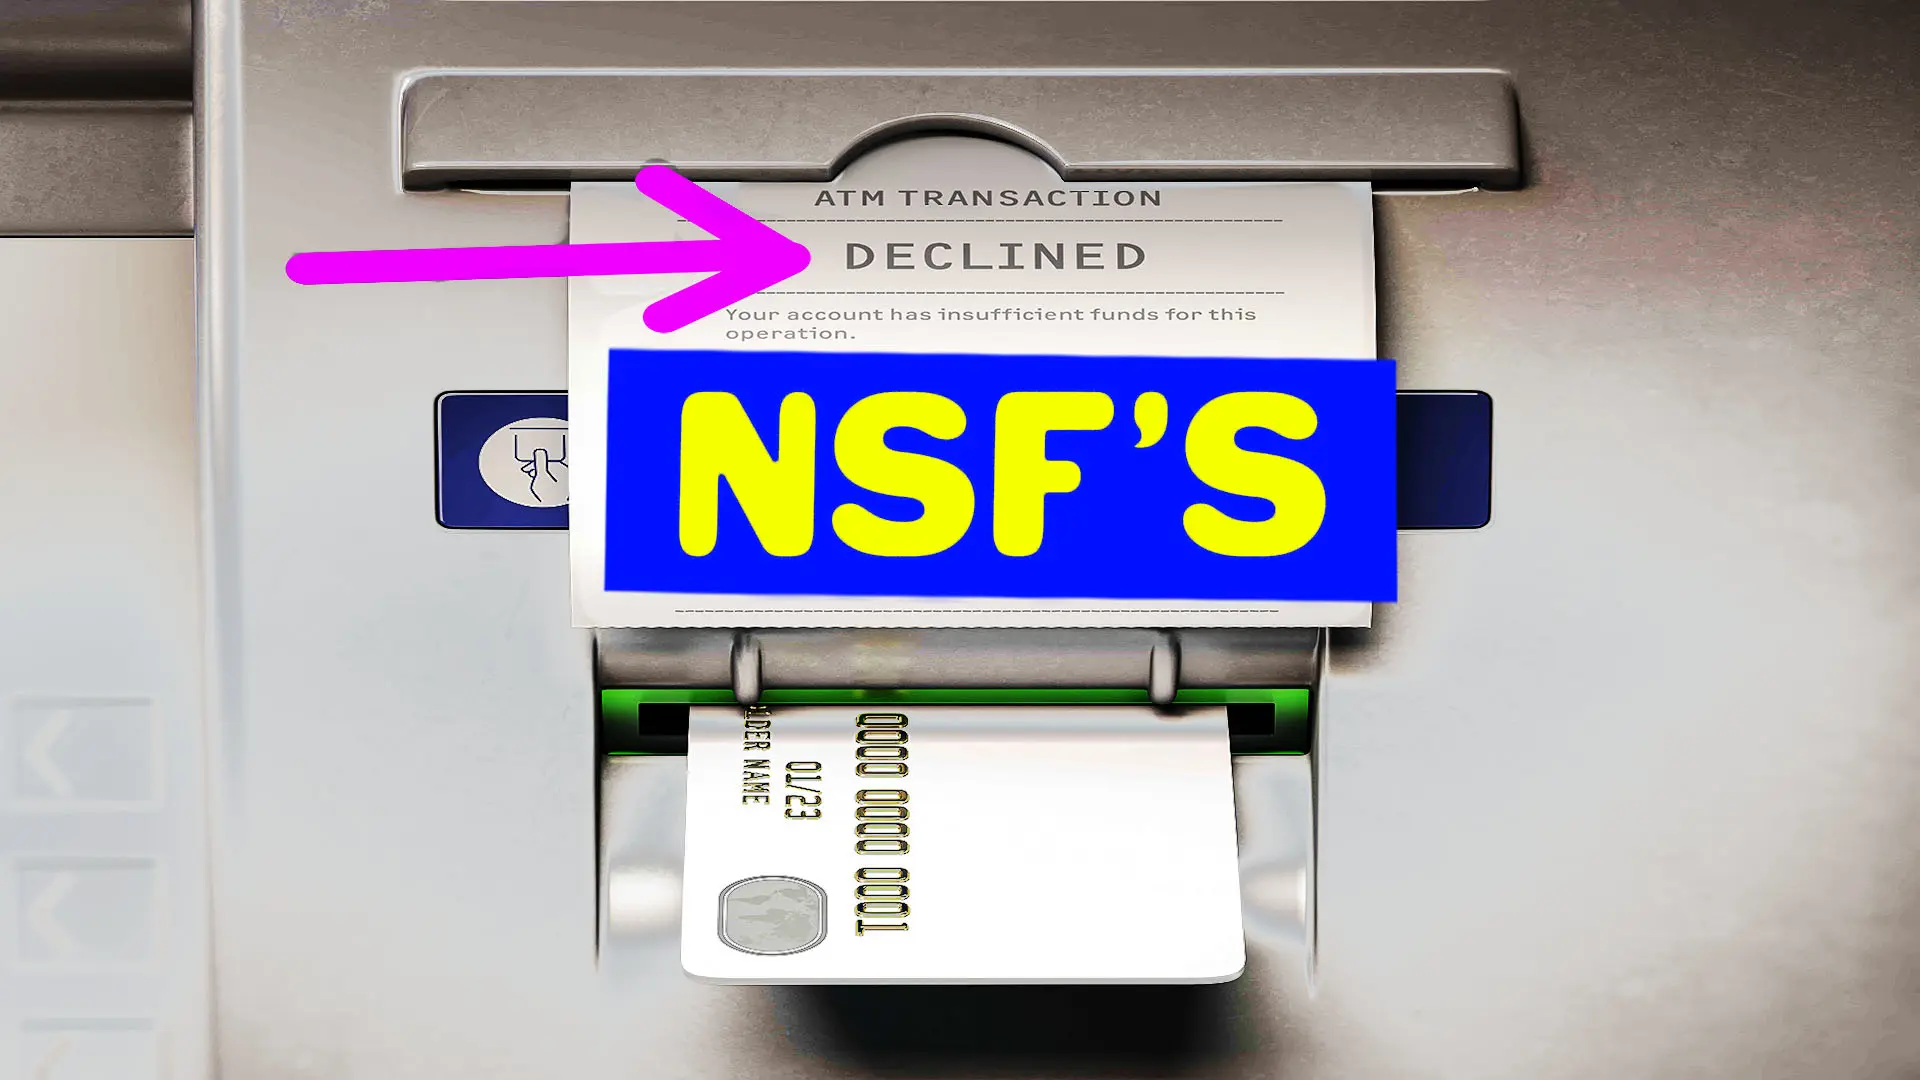 NSF's: Passing Bank account verification or DecisionLogic